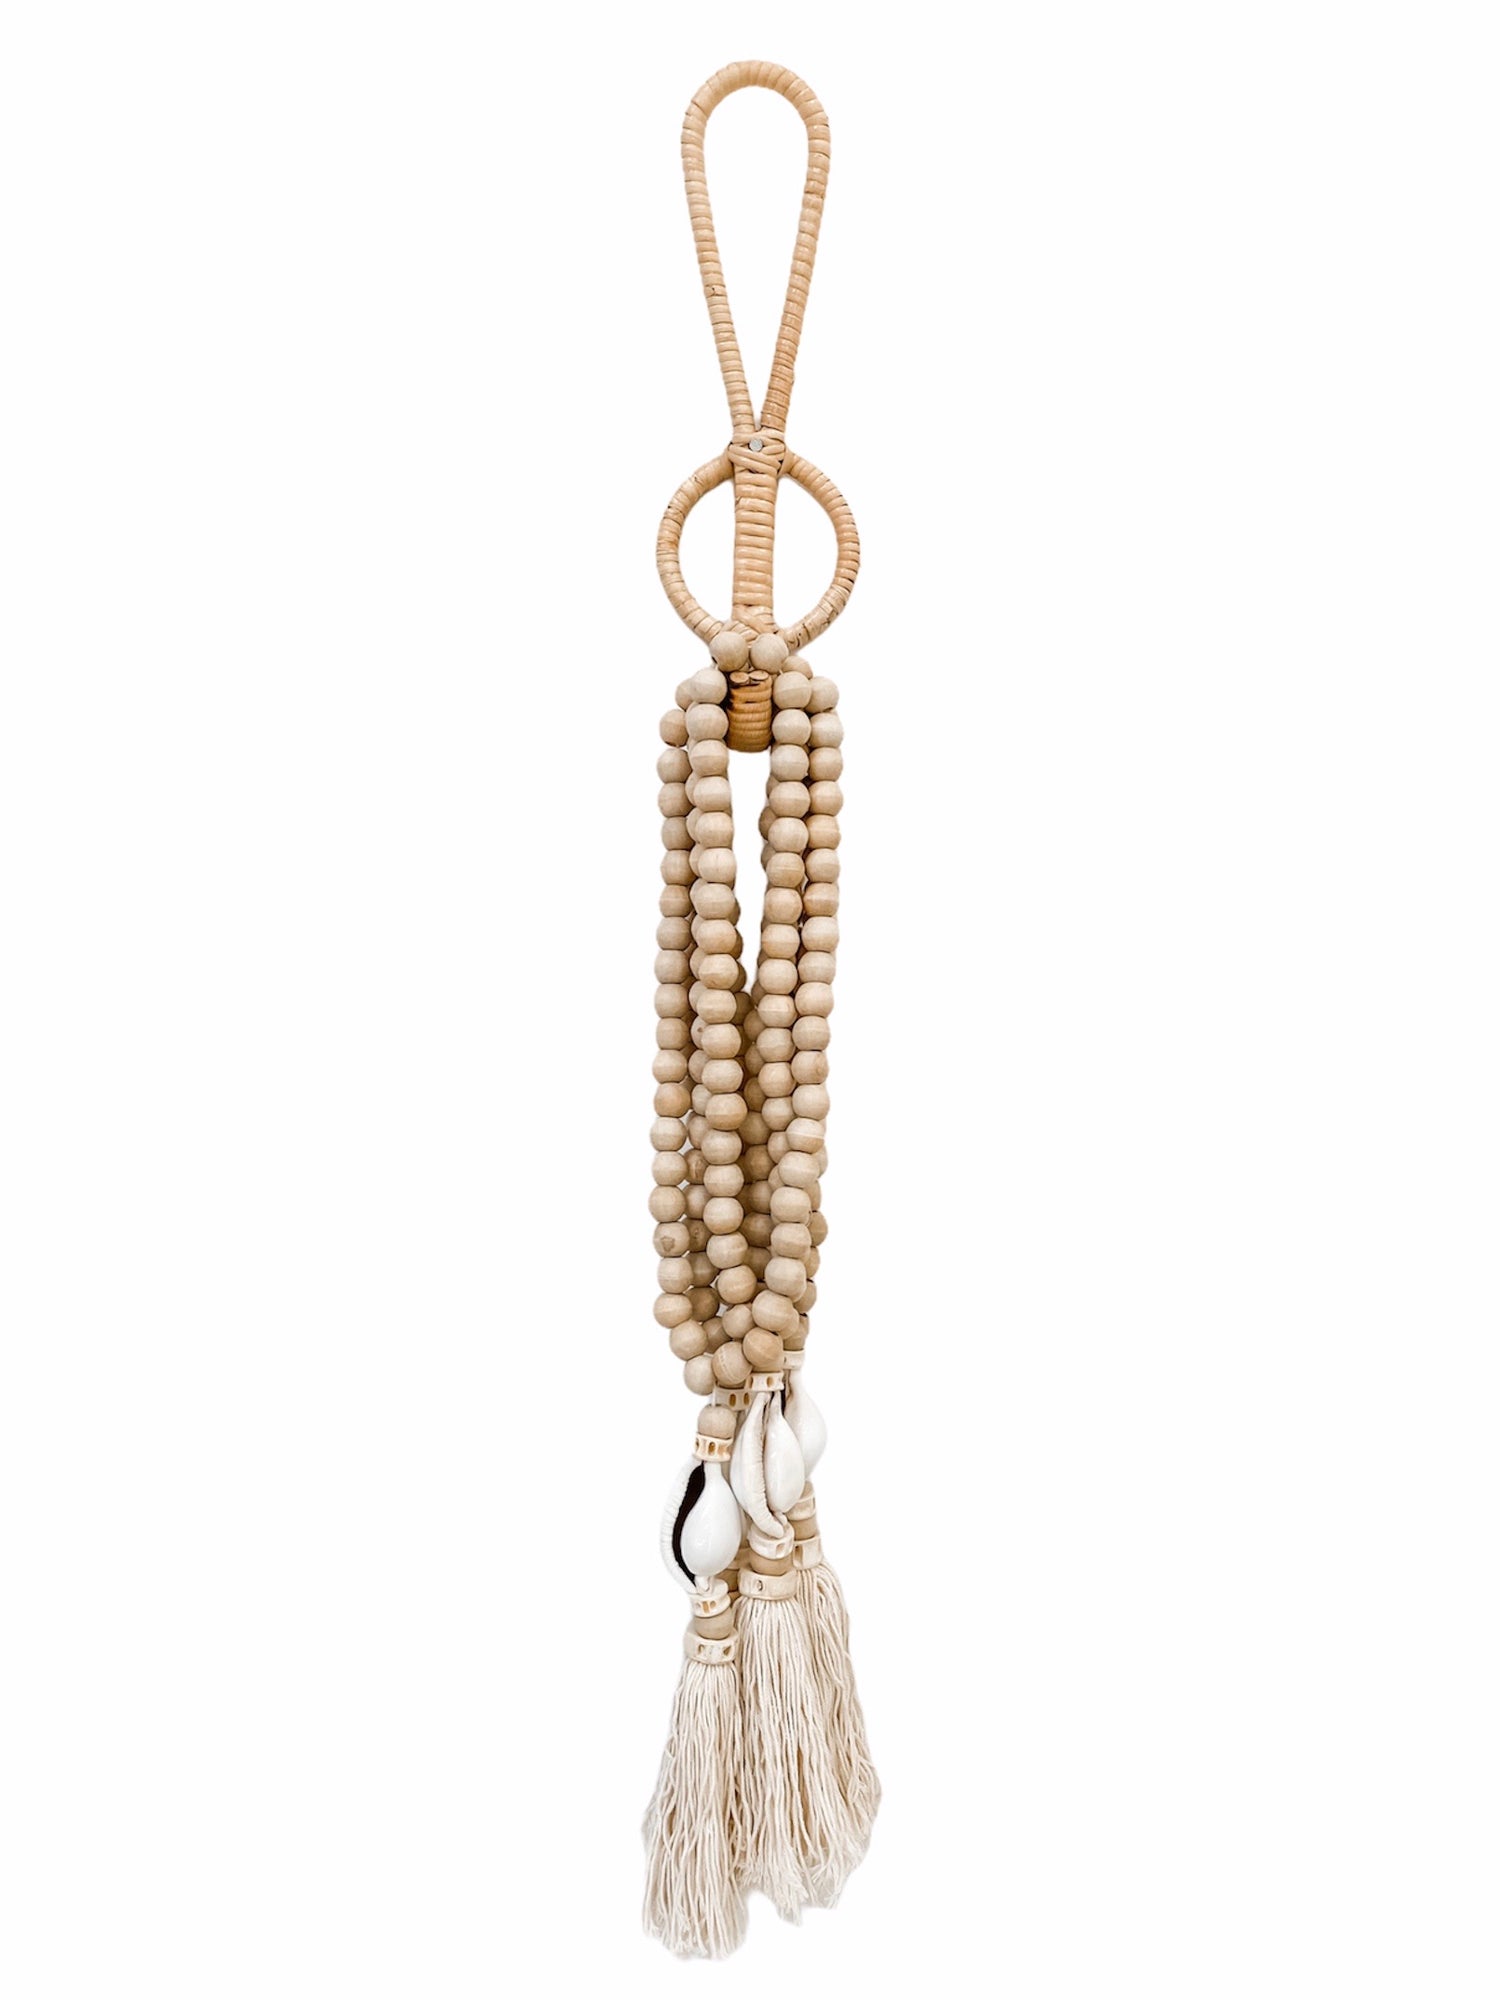 Bay Tassel featuring natural beads and cowrie shell